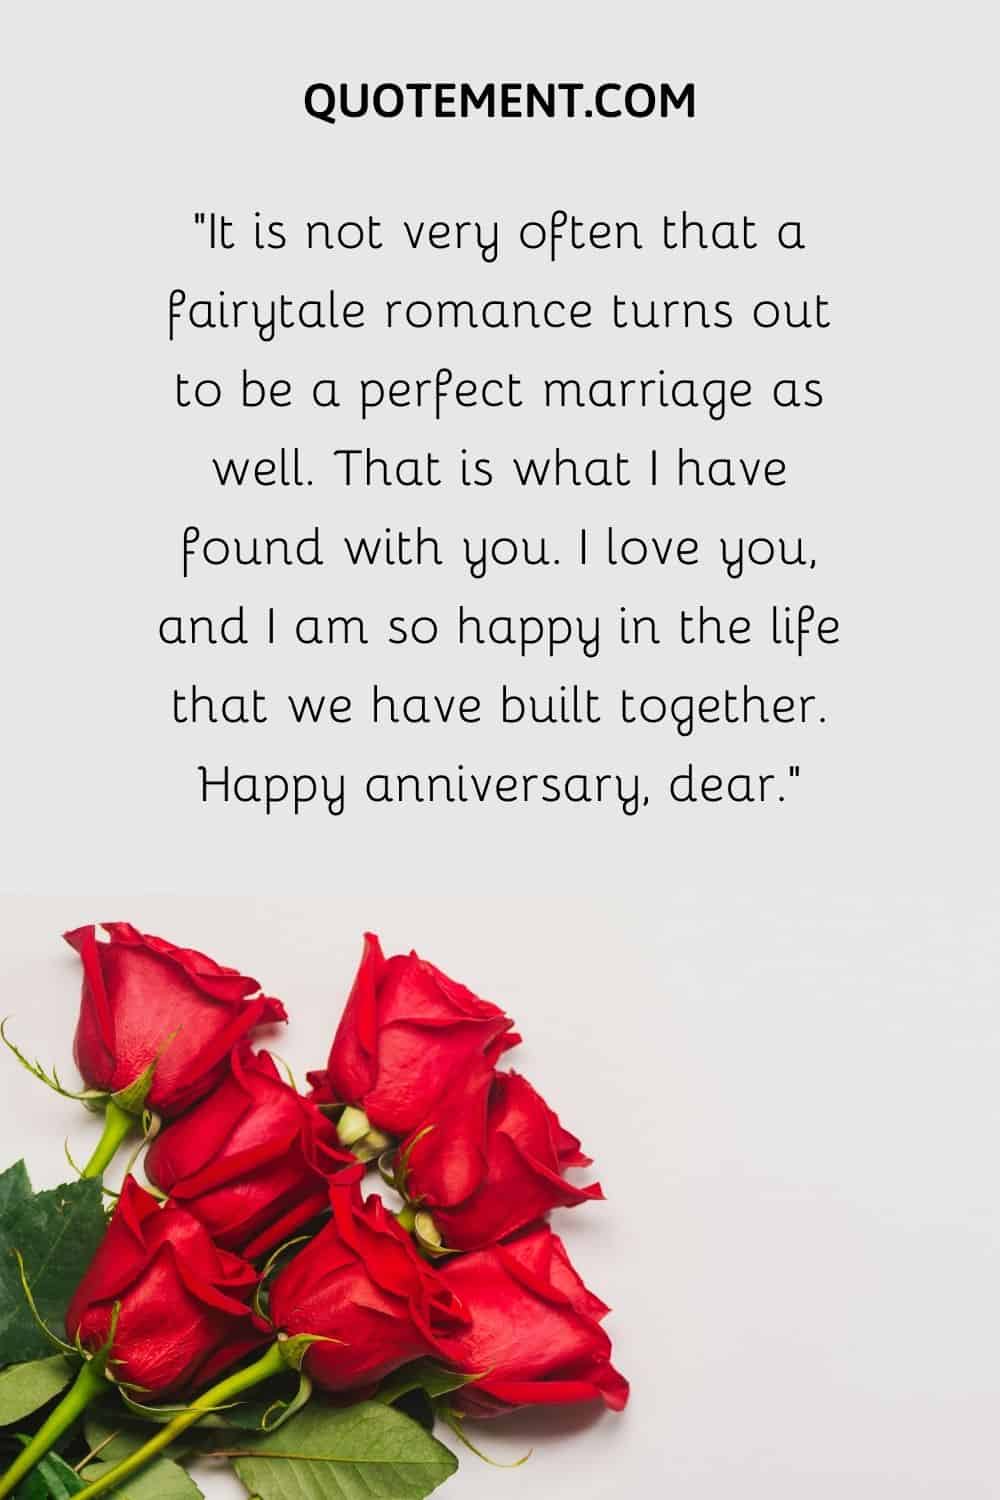 “It is not very often that a fairytale romance turns out to be a perfect marriage as well.